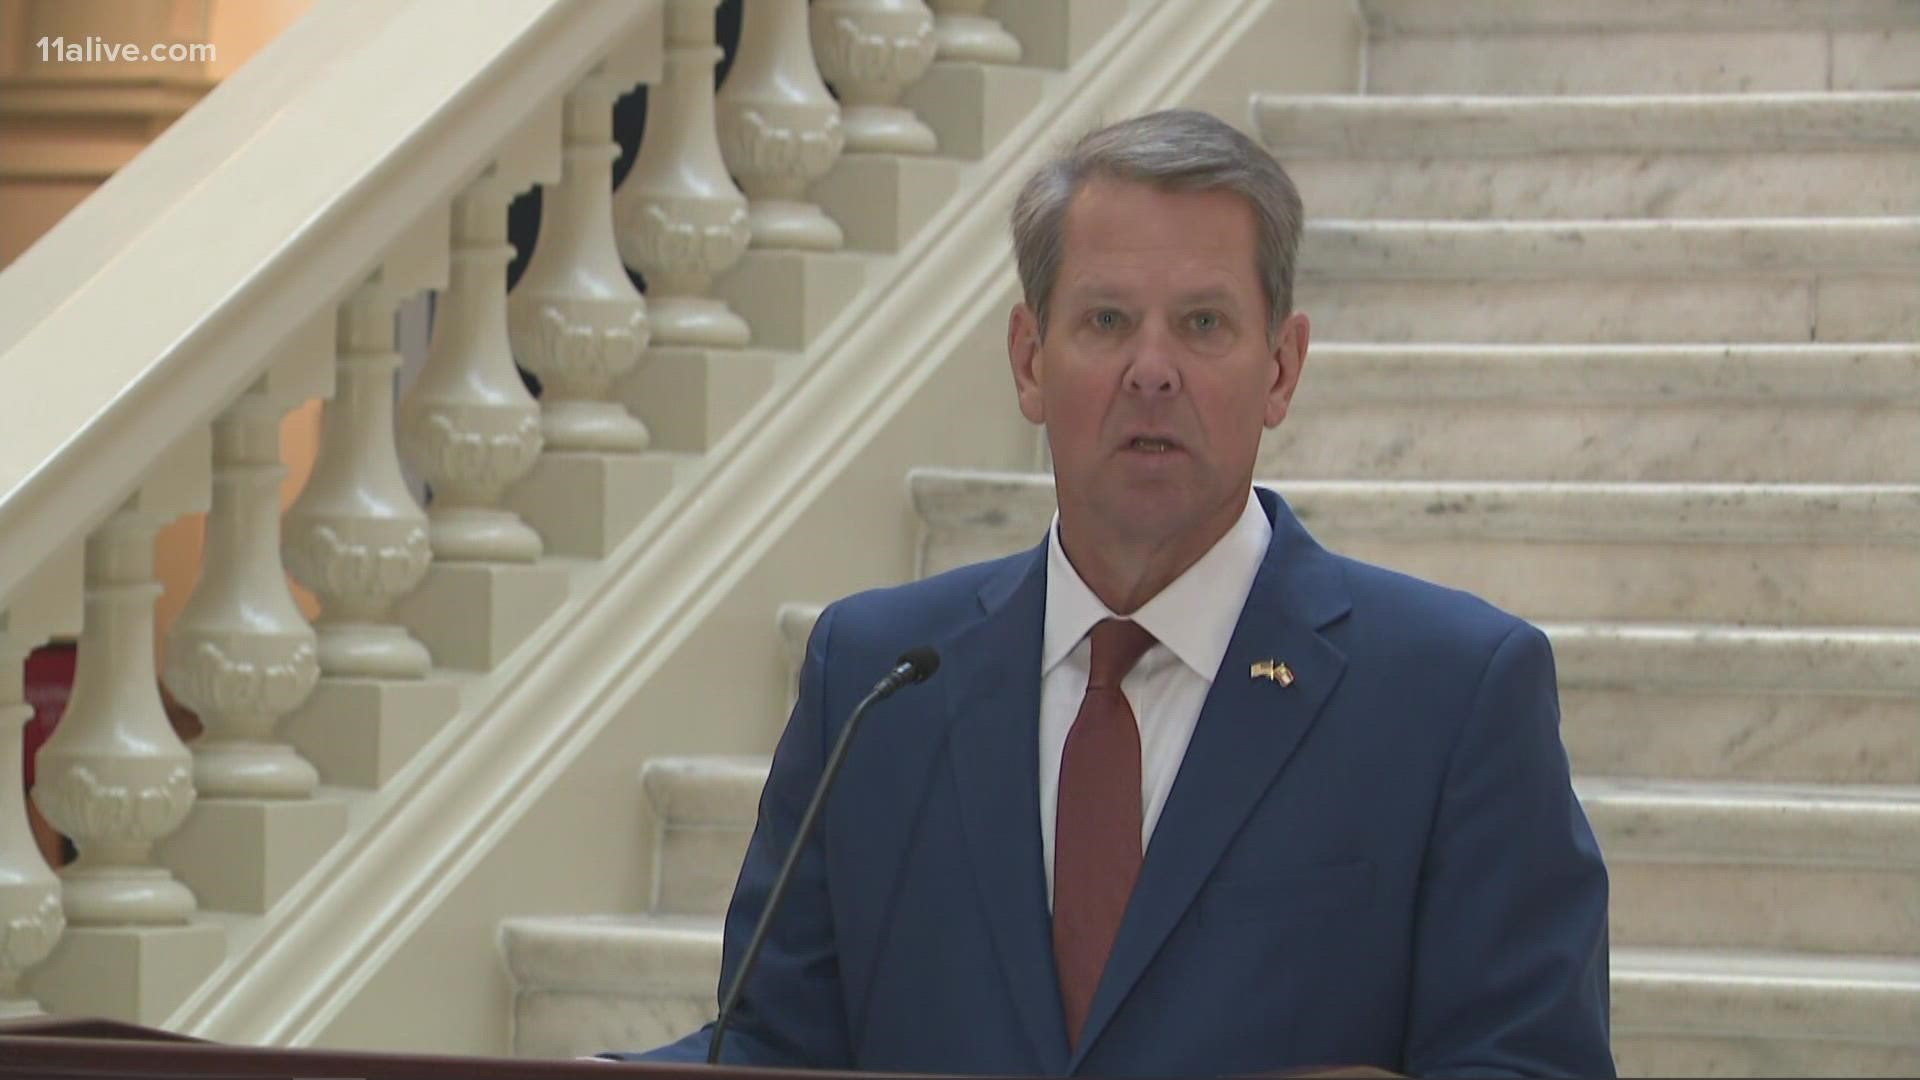 Kemp announced his intention to sue Biden back in September.